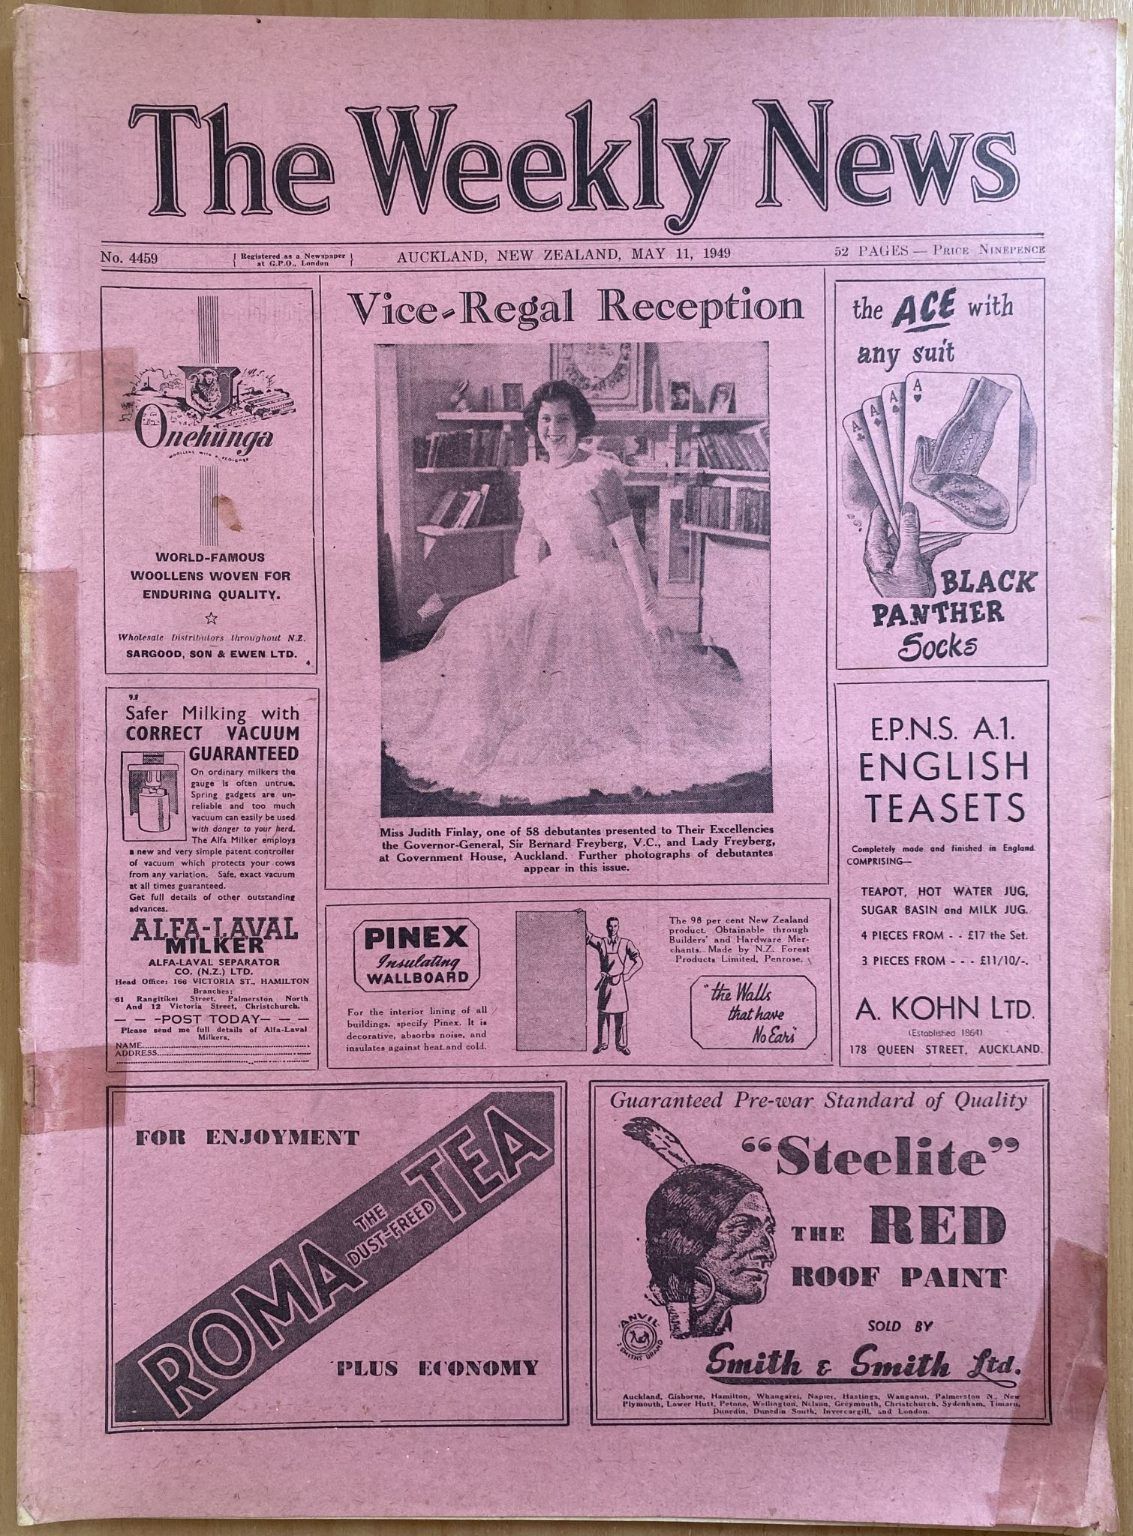 OLD NEWSPAPER: The Weekly News, No. 4459, 11 May 1949